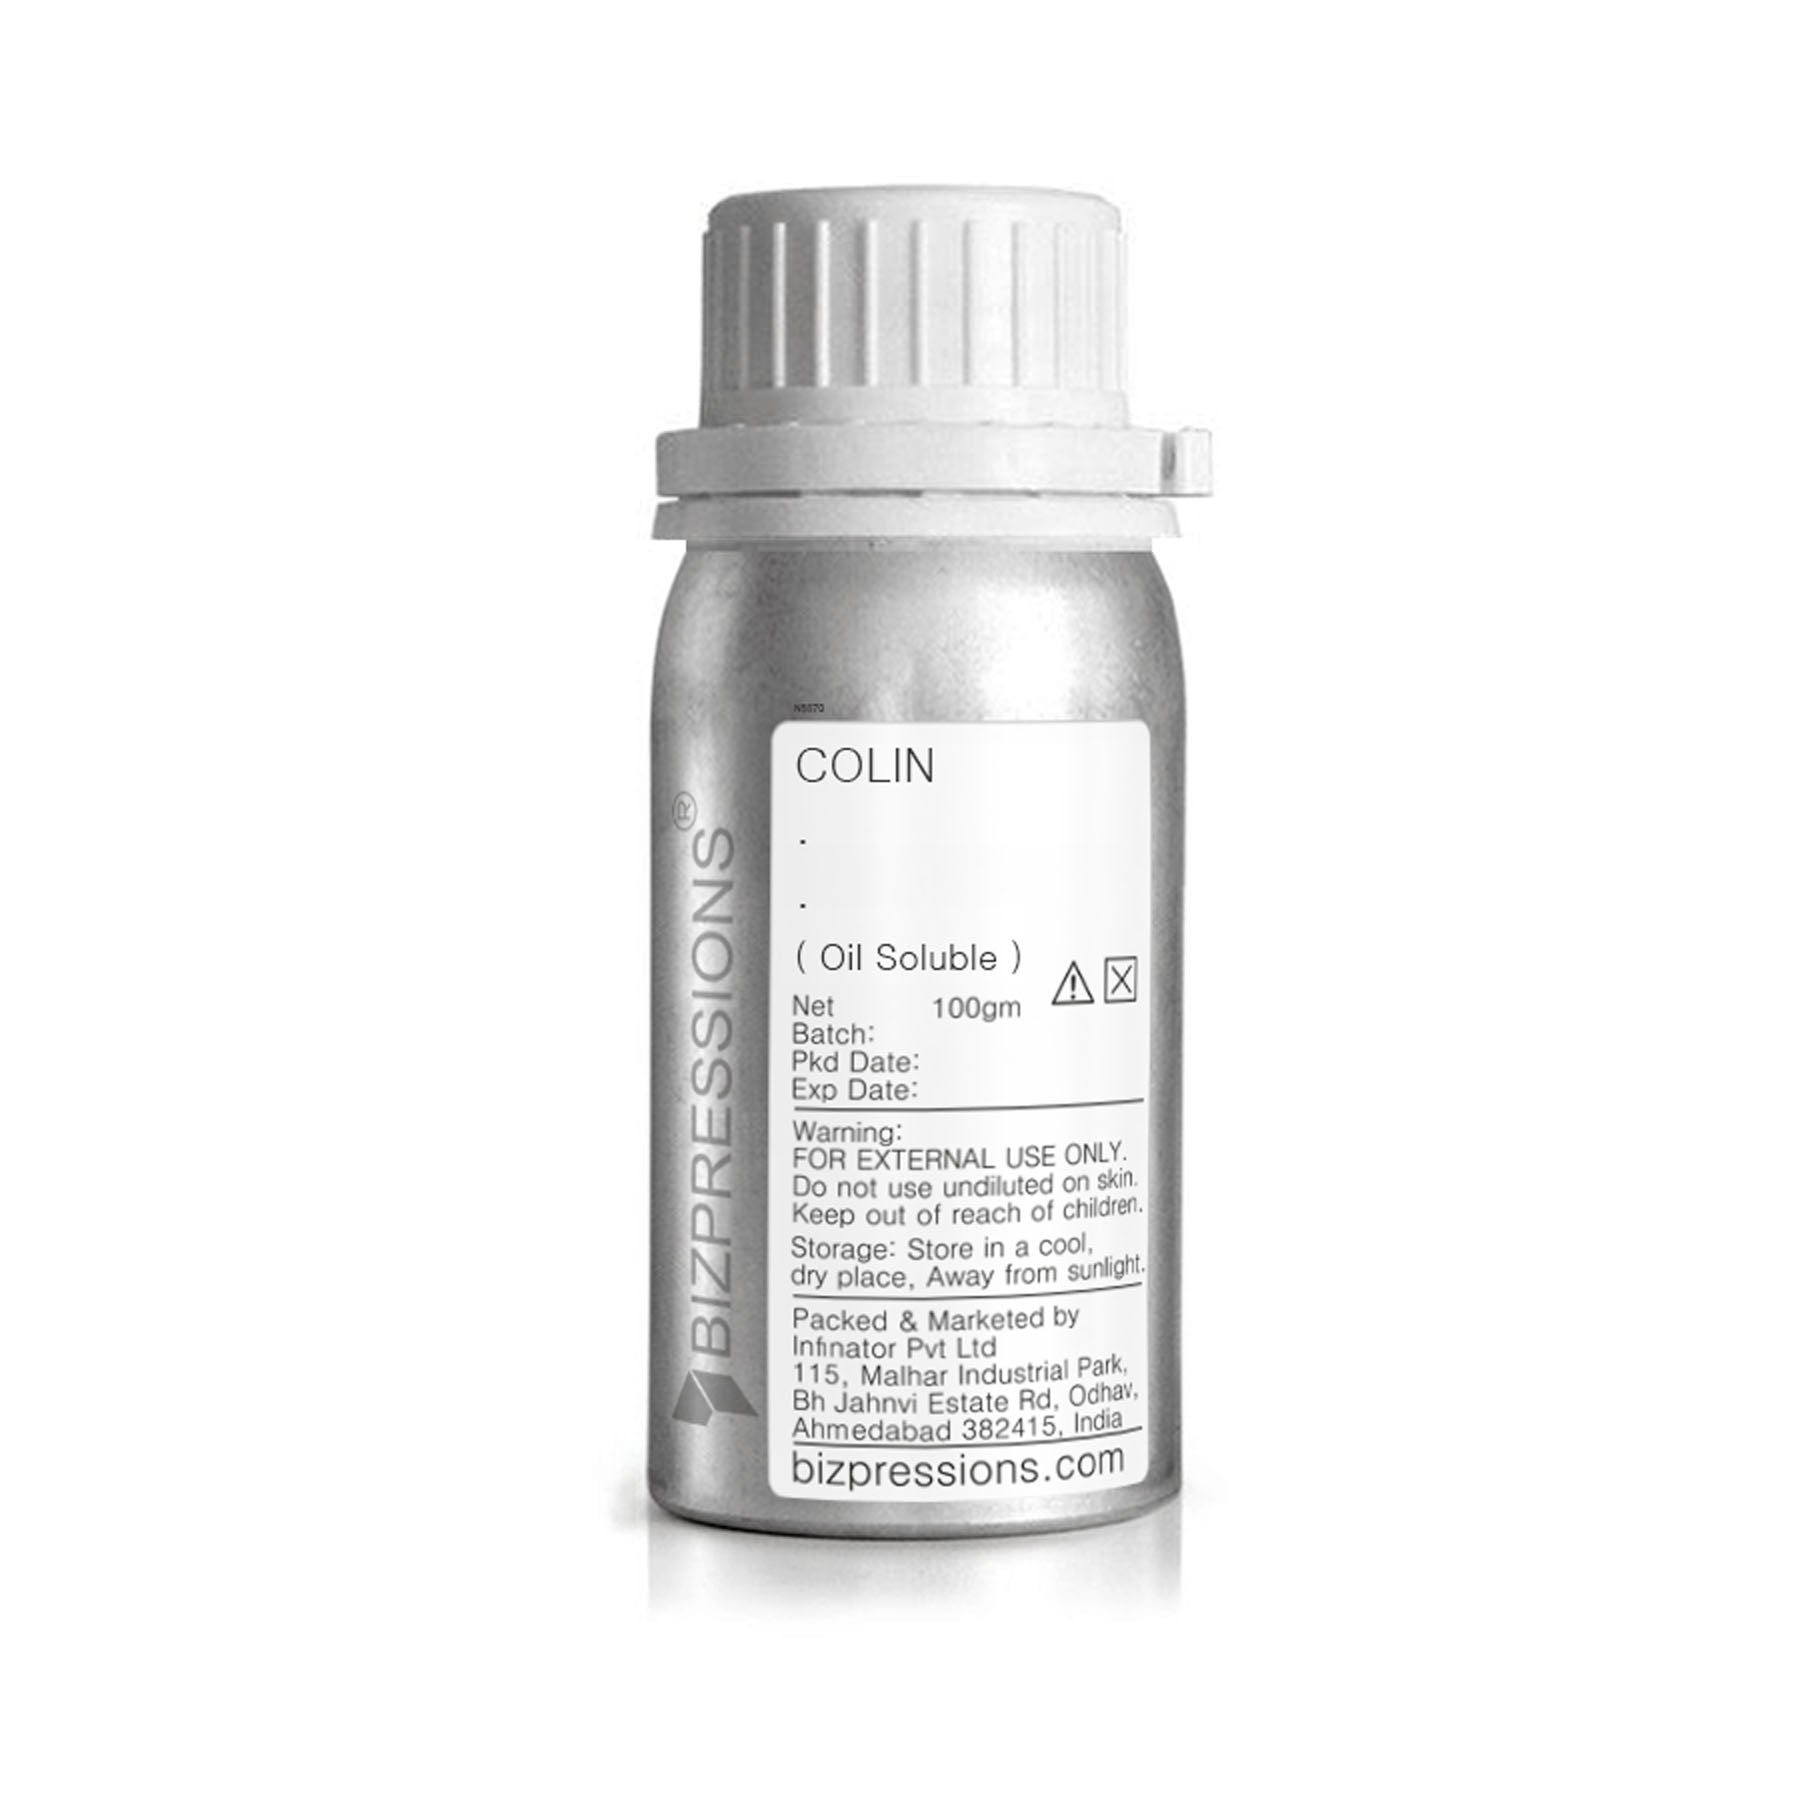 COLIN - Fragrance ( Oil Soluble ) - 100 gm